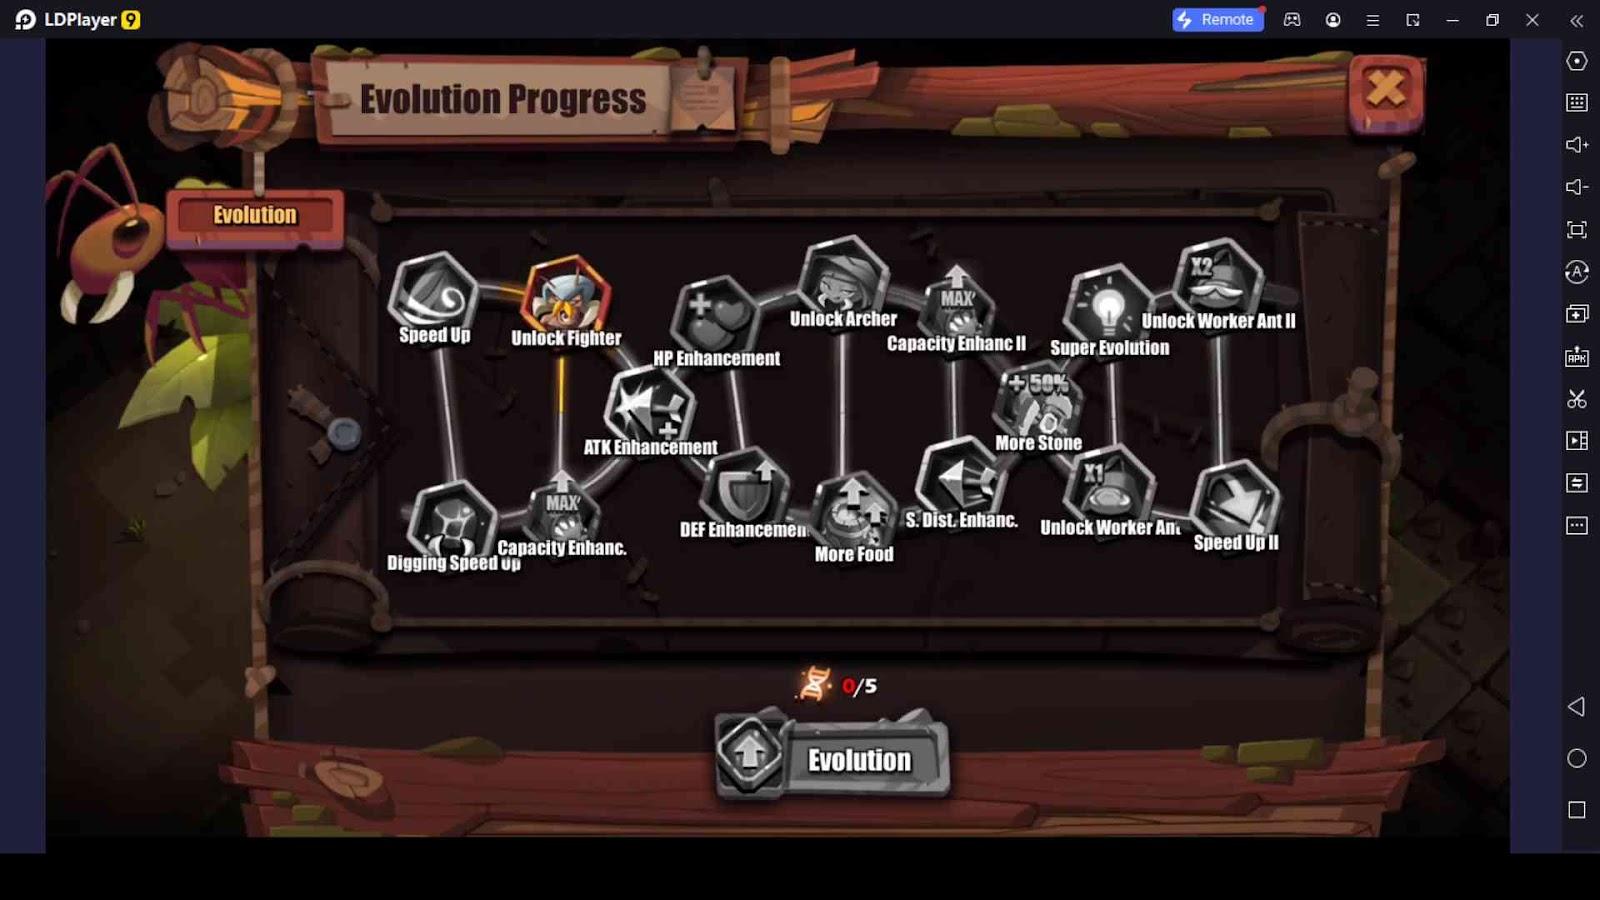 Evolution Pool - The Key to Unlock Powerful Soldier Ants